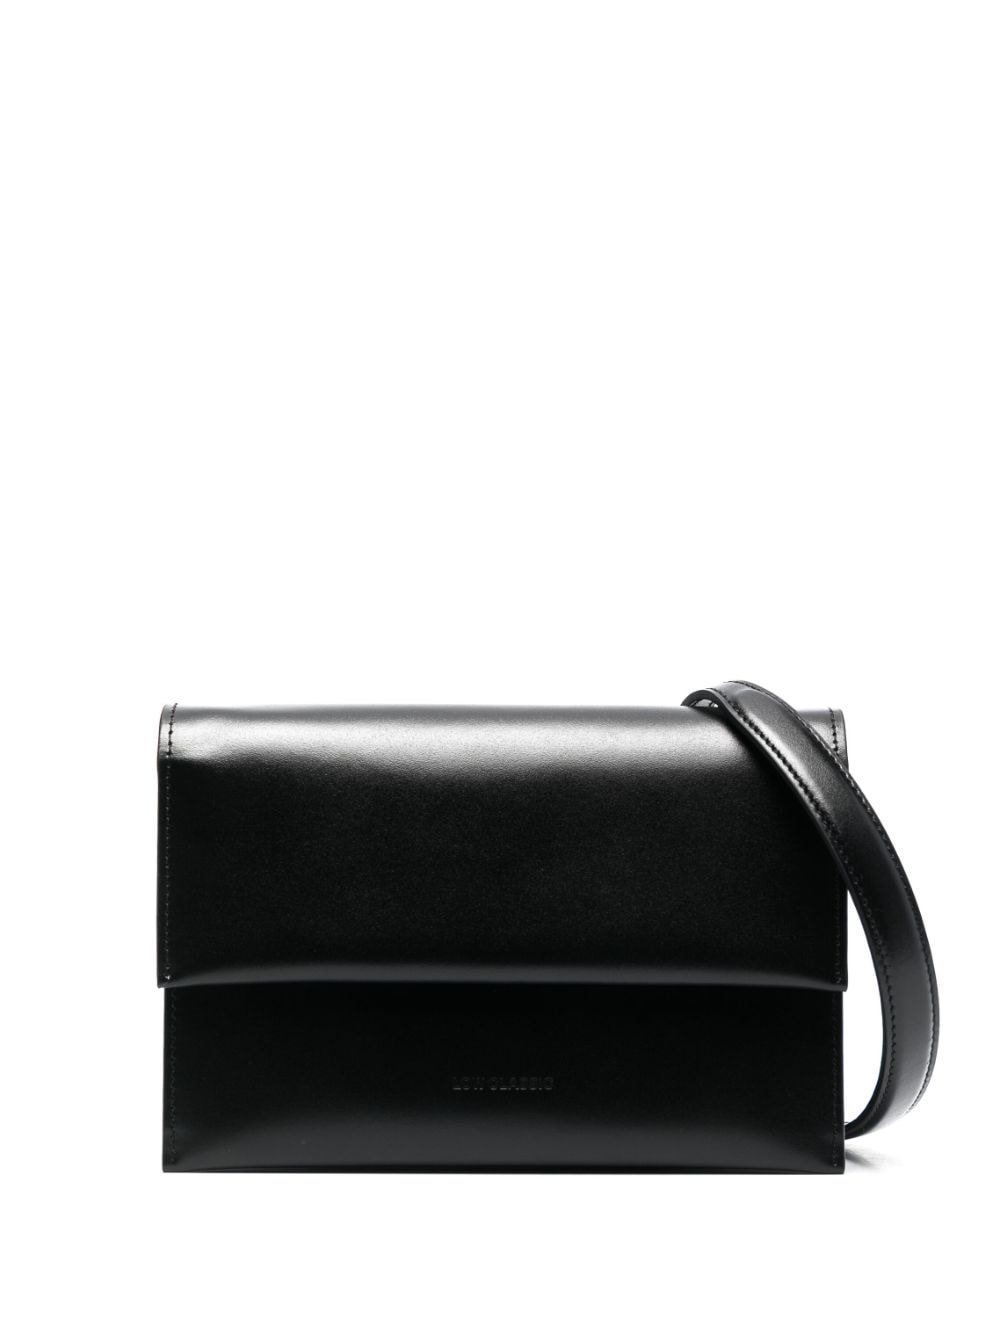 Low Classic foldover top leather bag - Black von Low Classic